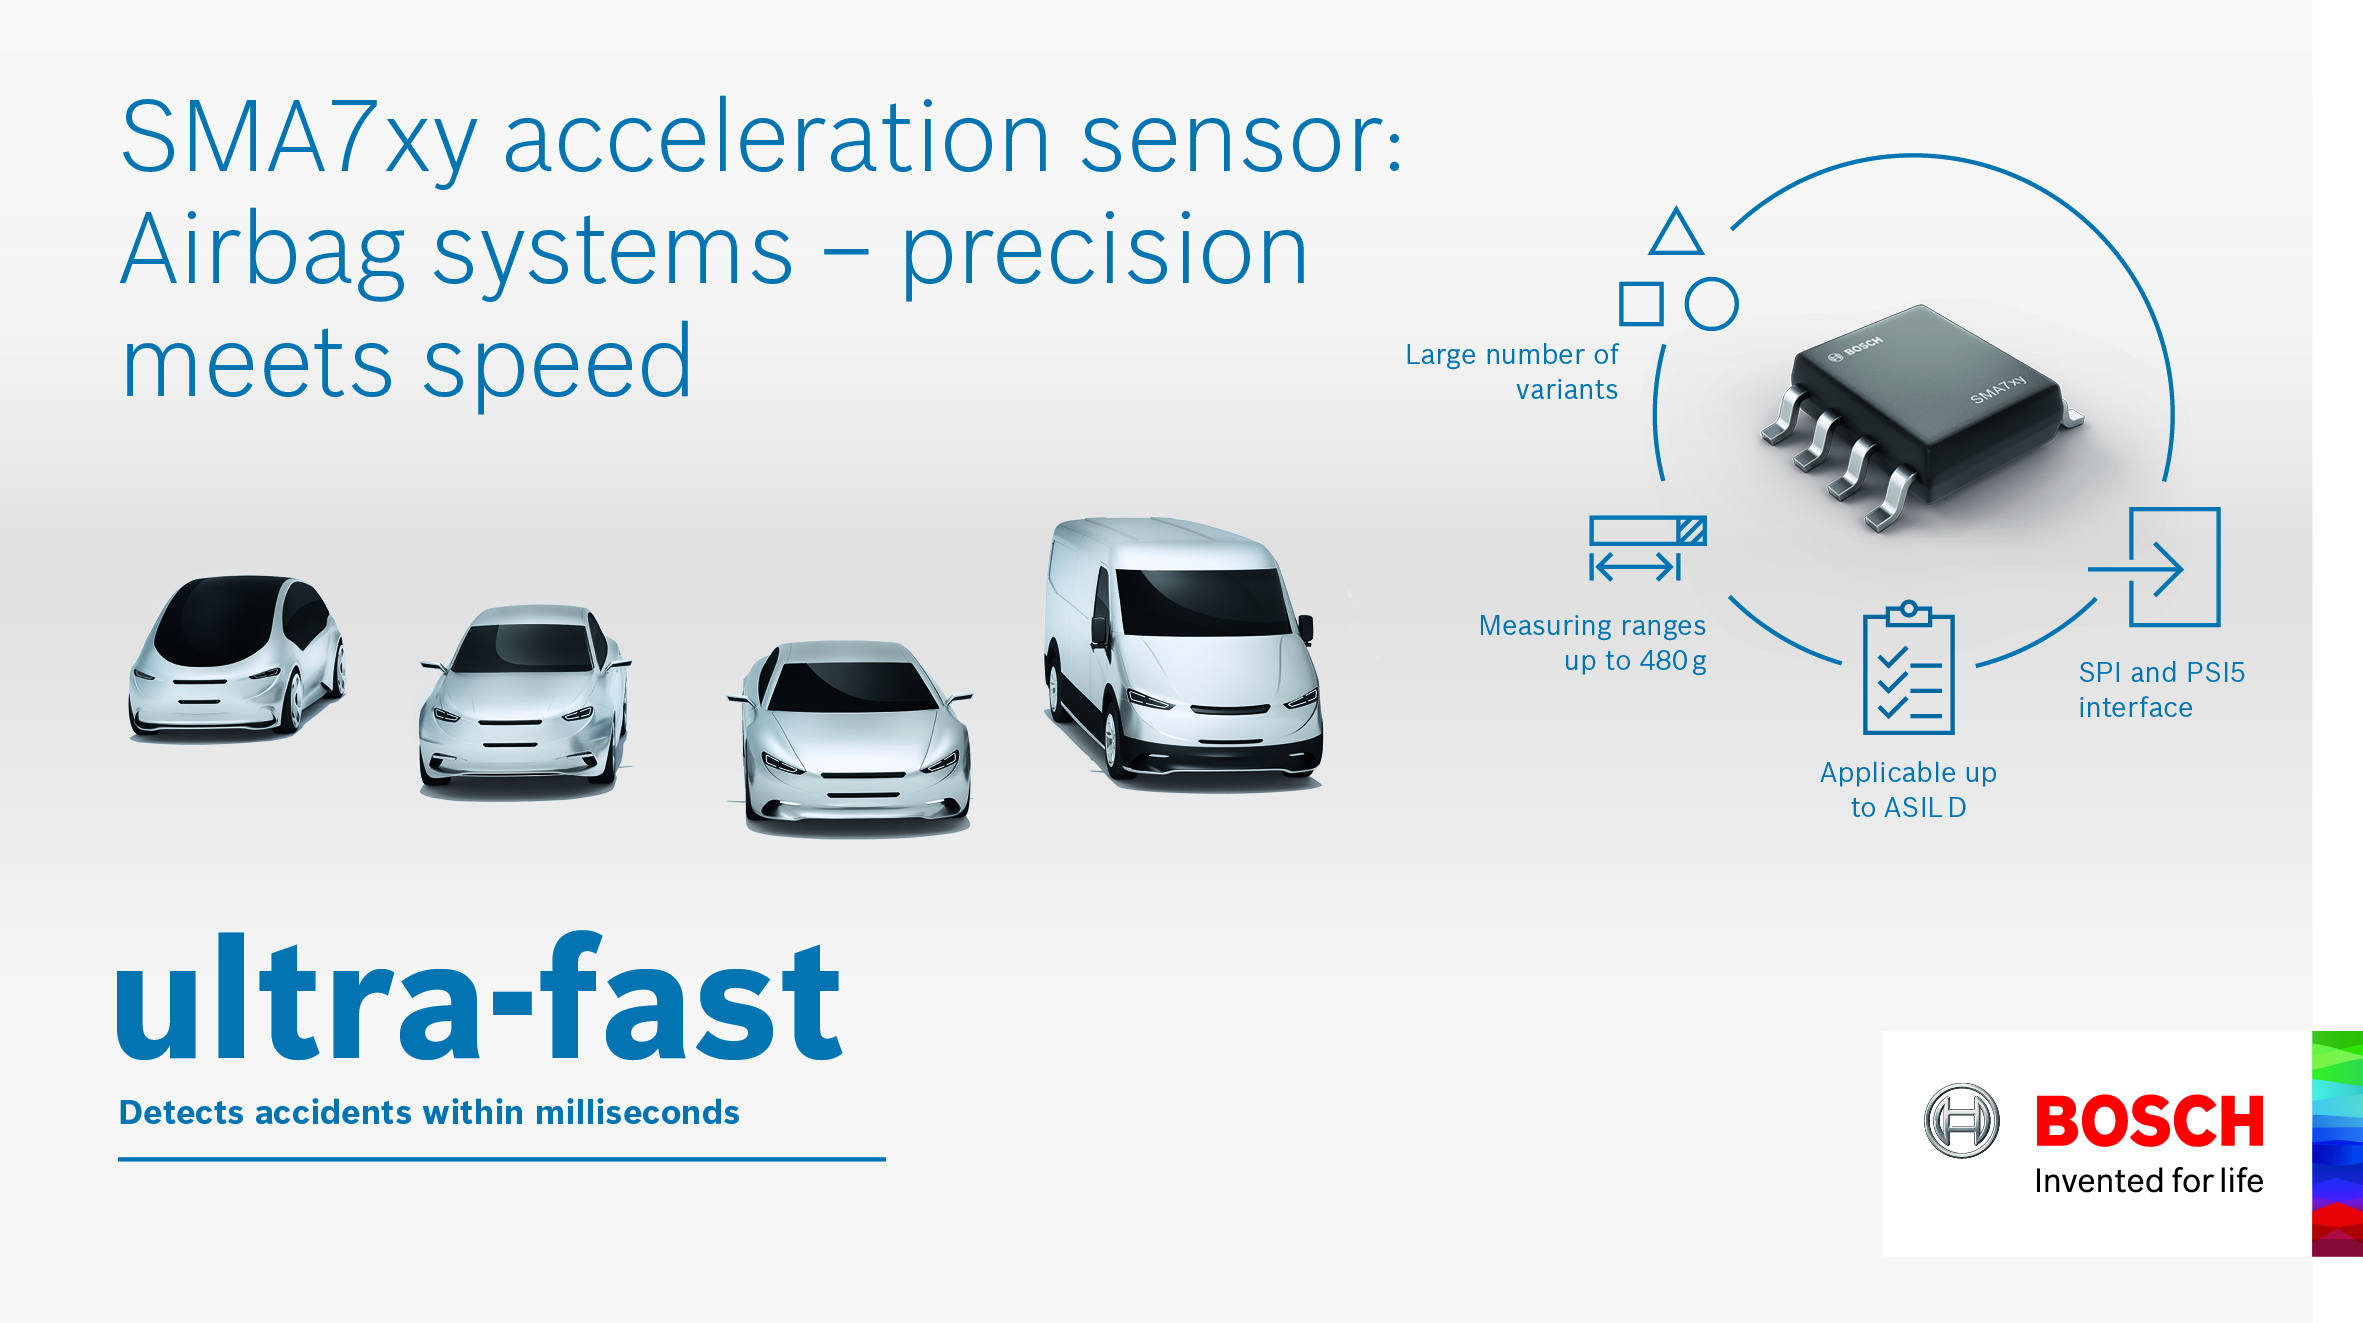 New high-G acceleration sensors increase driver and passenger safety.